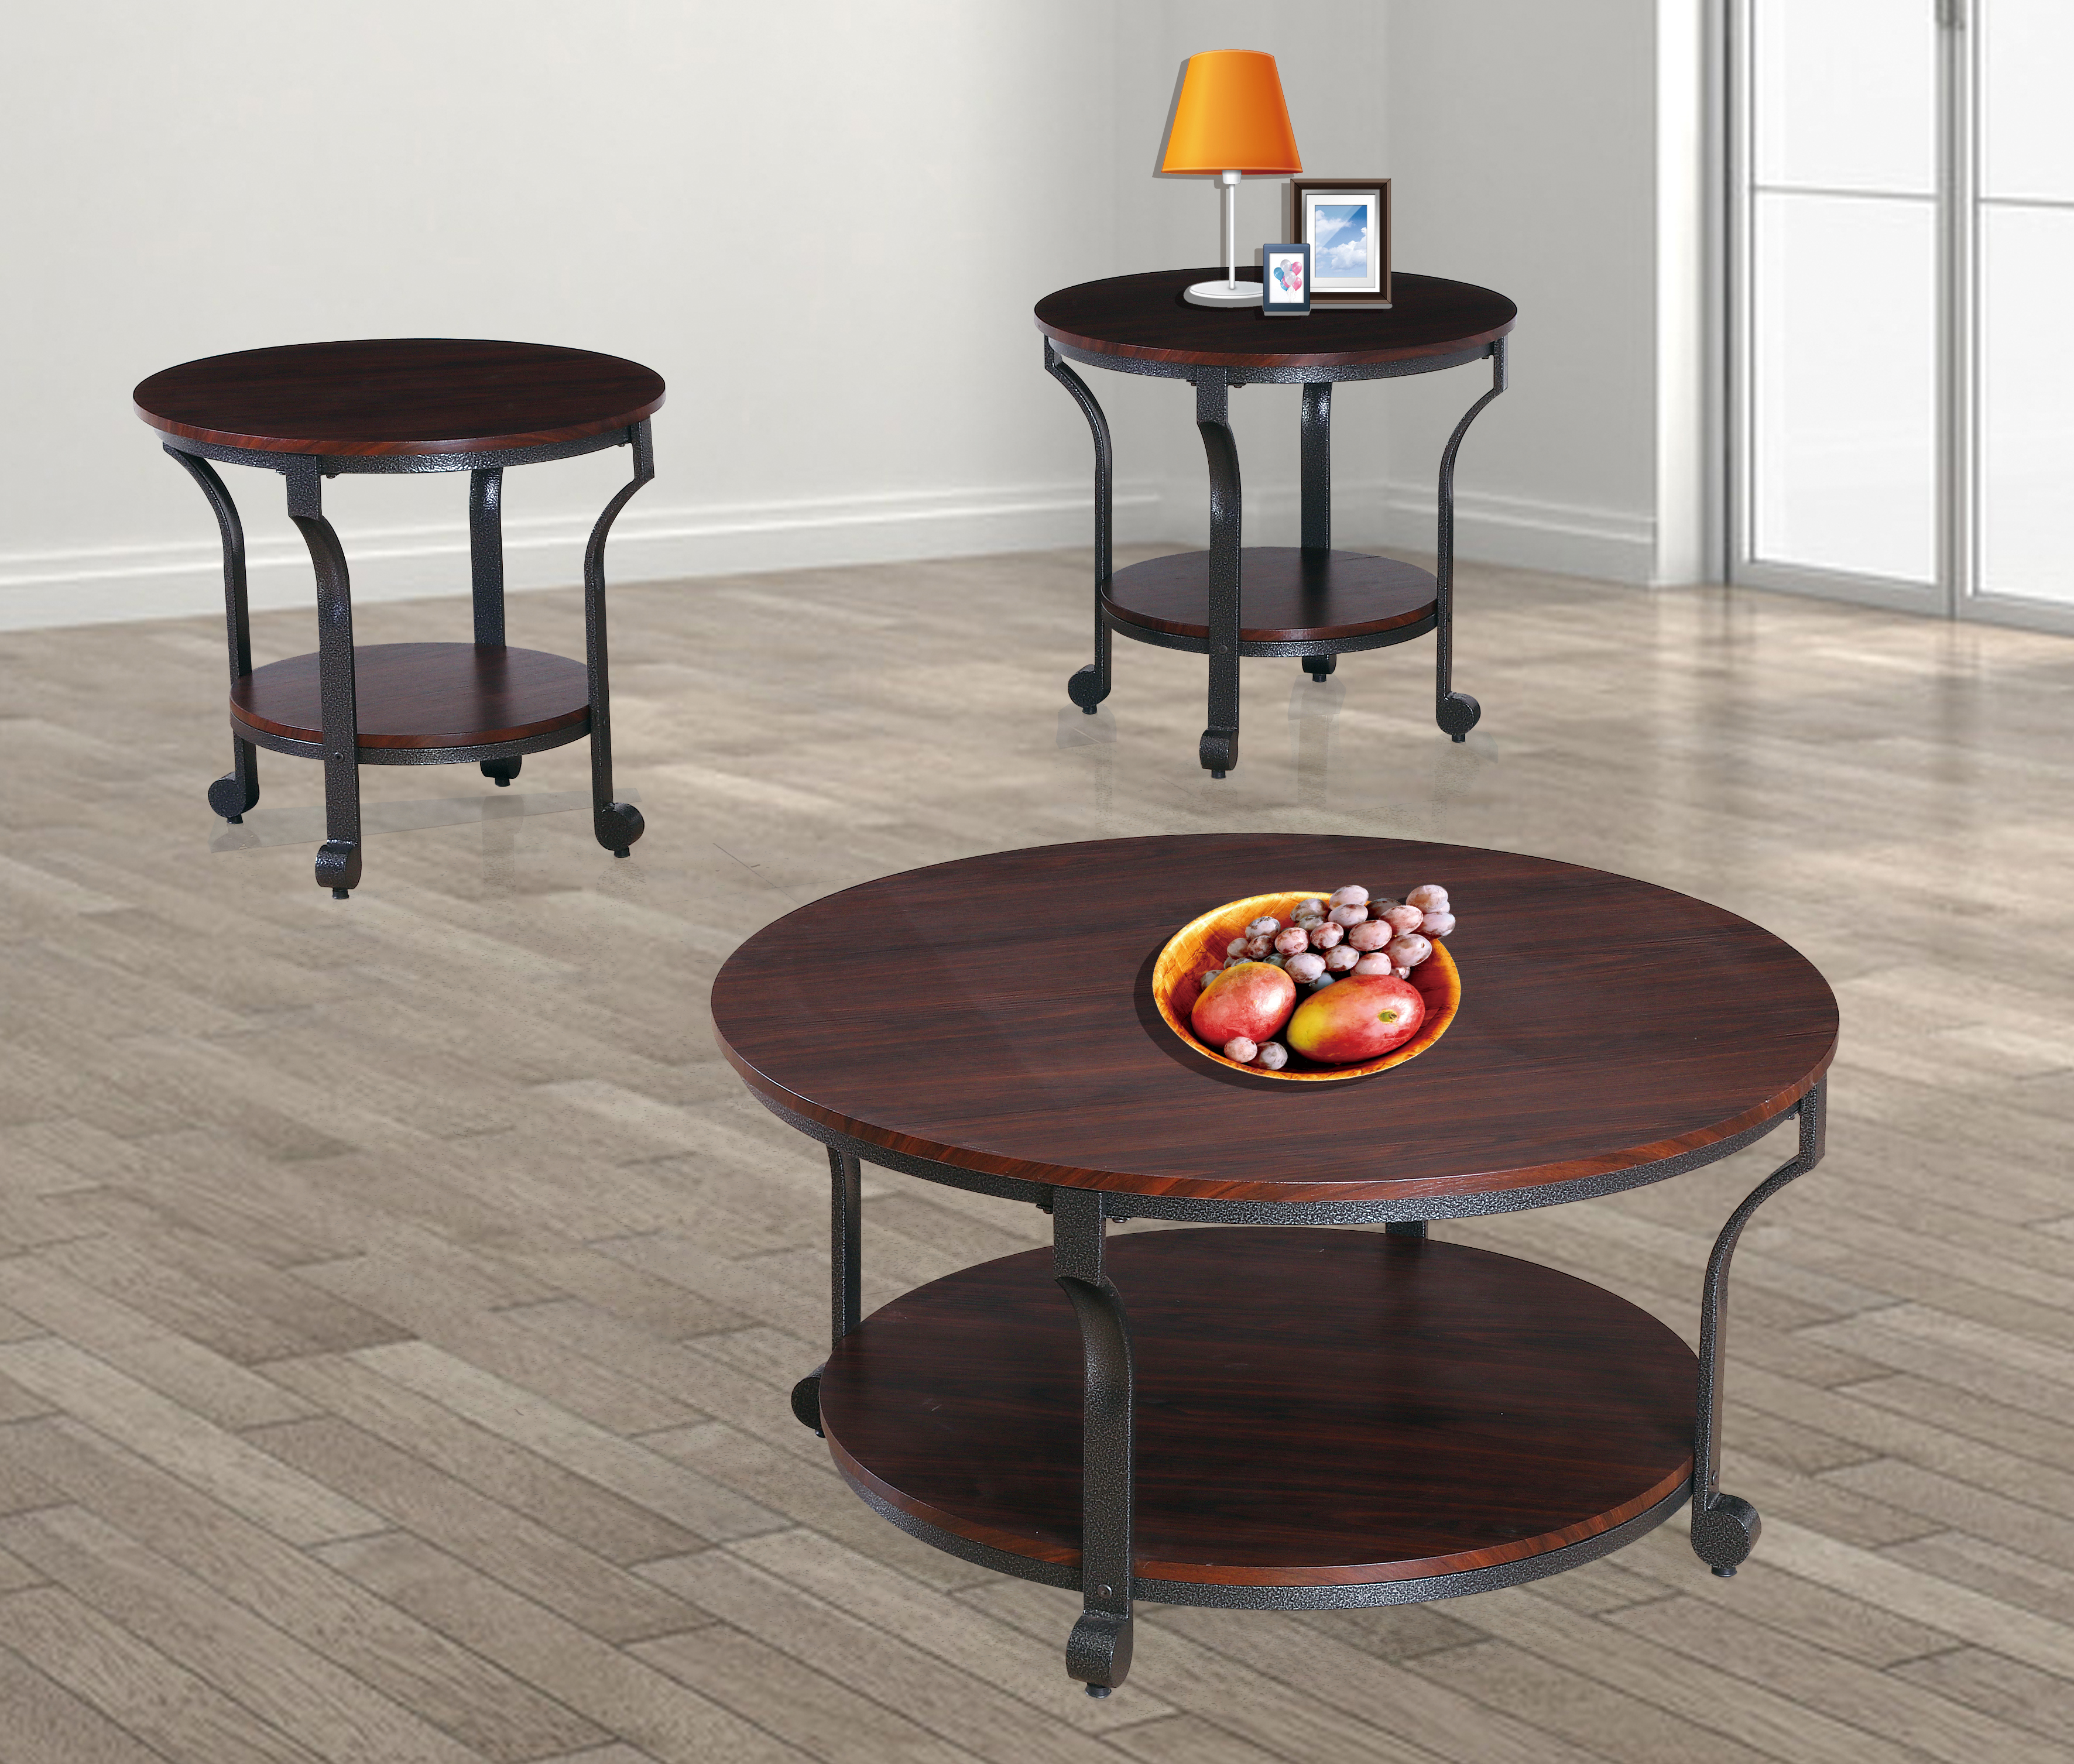 GS-CT855 3PC COFFEE TABLE SET Featured Image